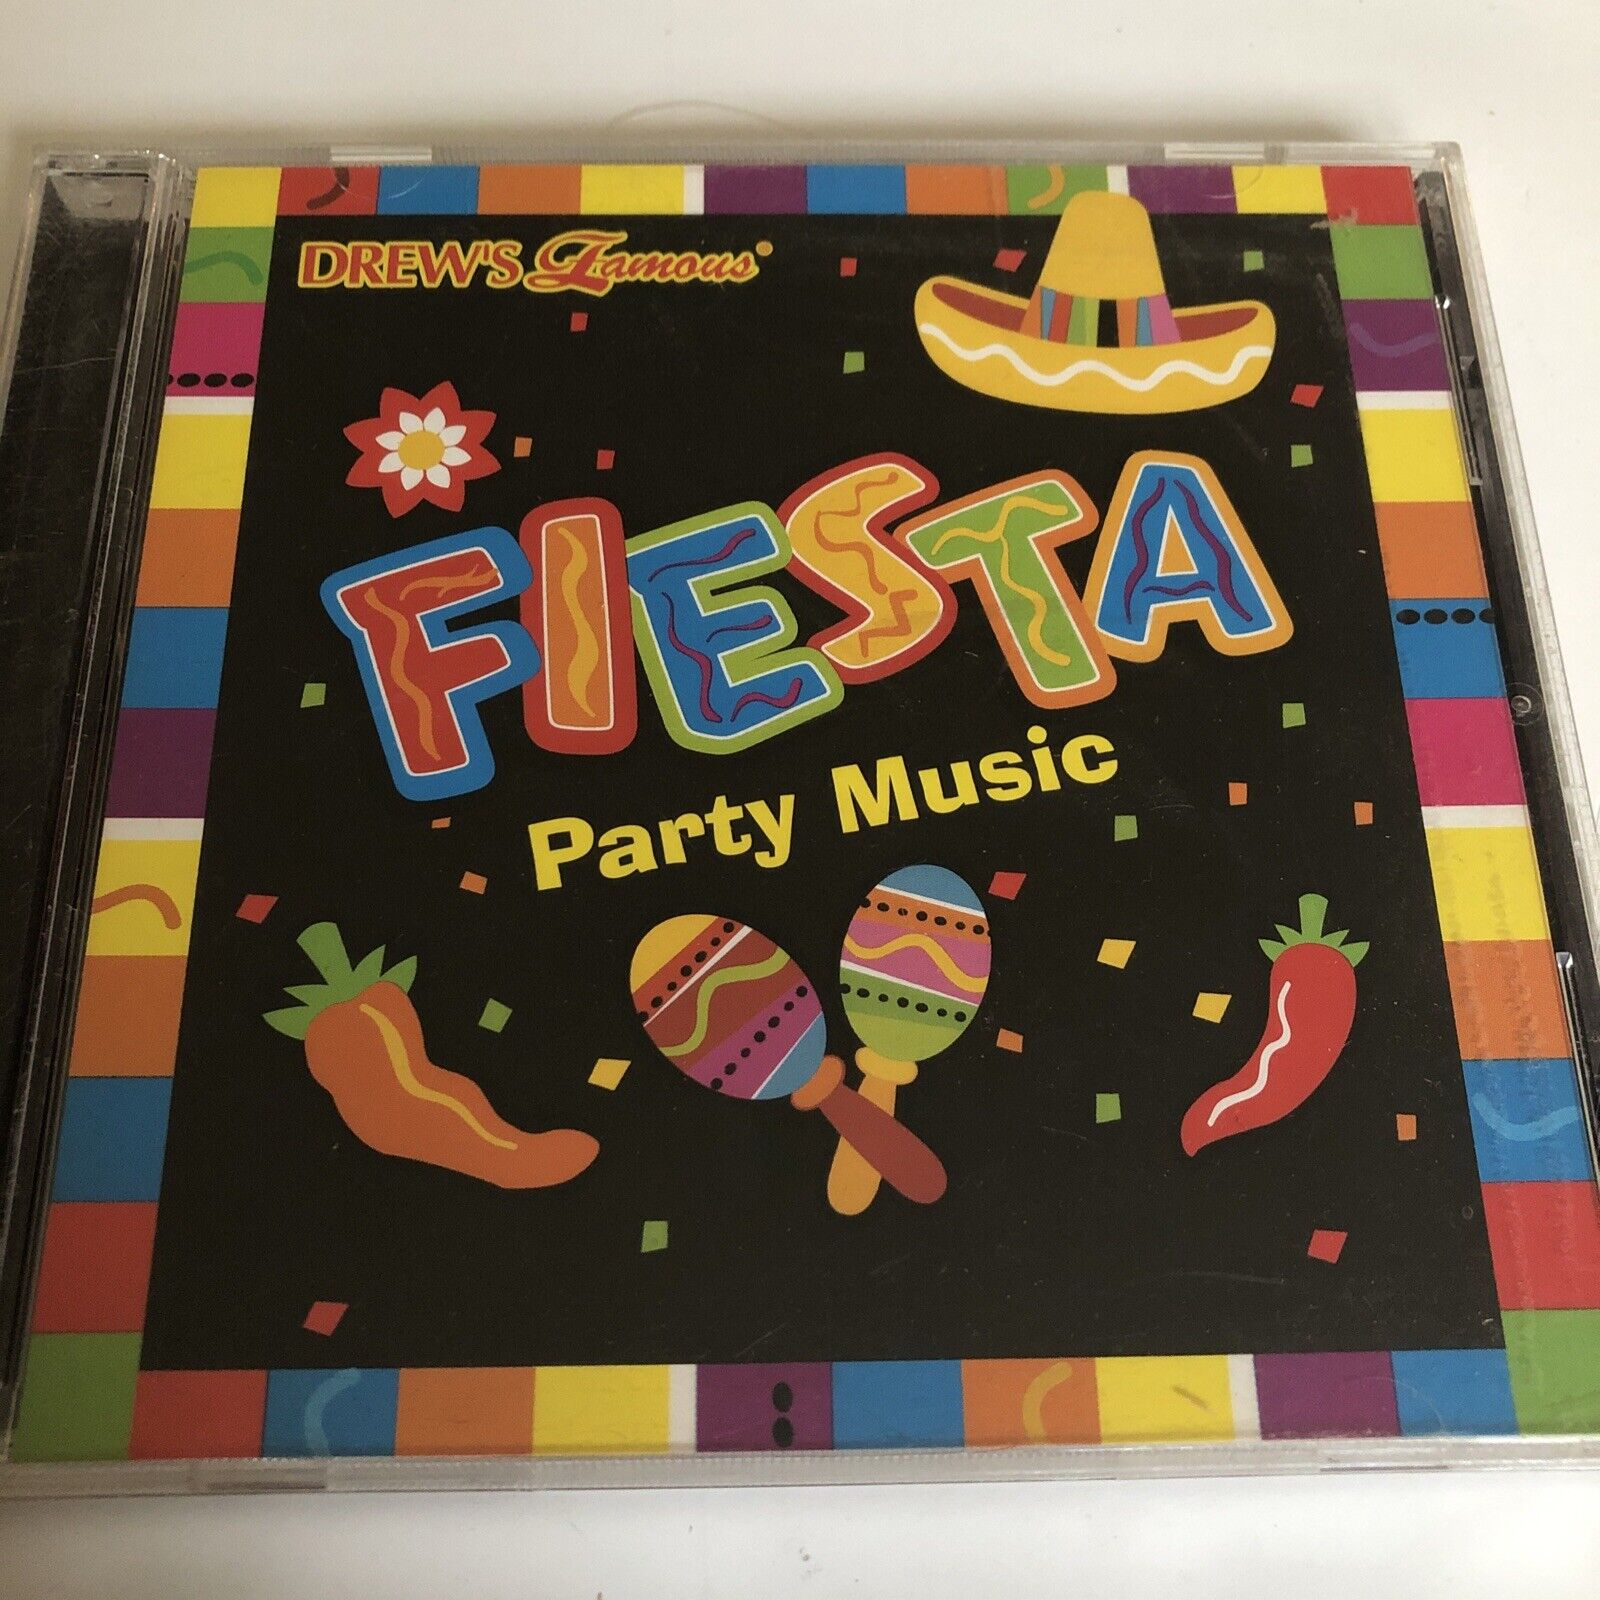 DREW'S FAMOUS - Fiesta Party Music CD